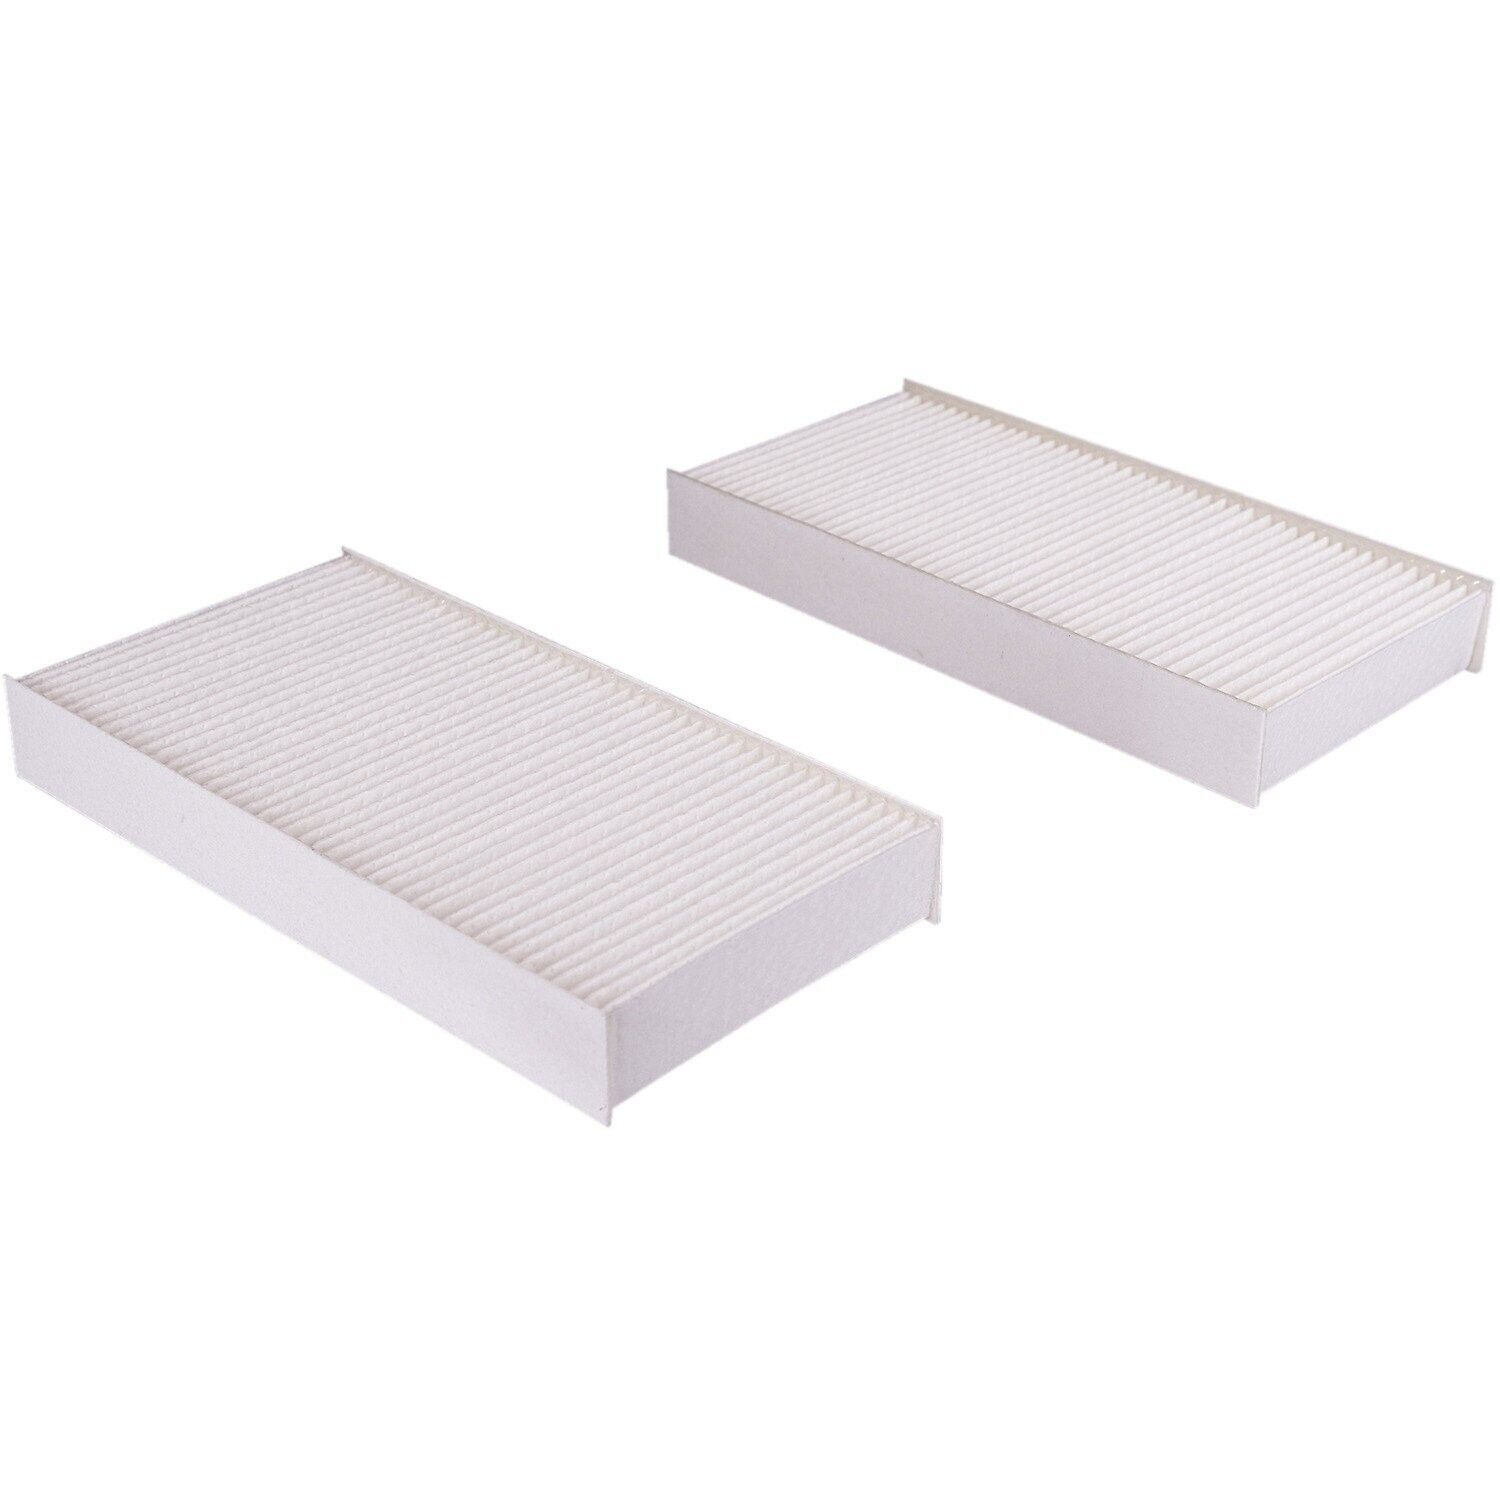 DENSO Cabin Air Filter Pack of 2 for Acura RSX Honda Civic CR-V Element